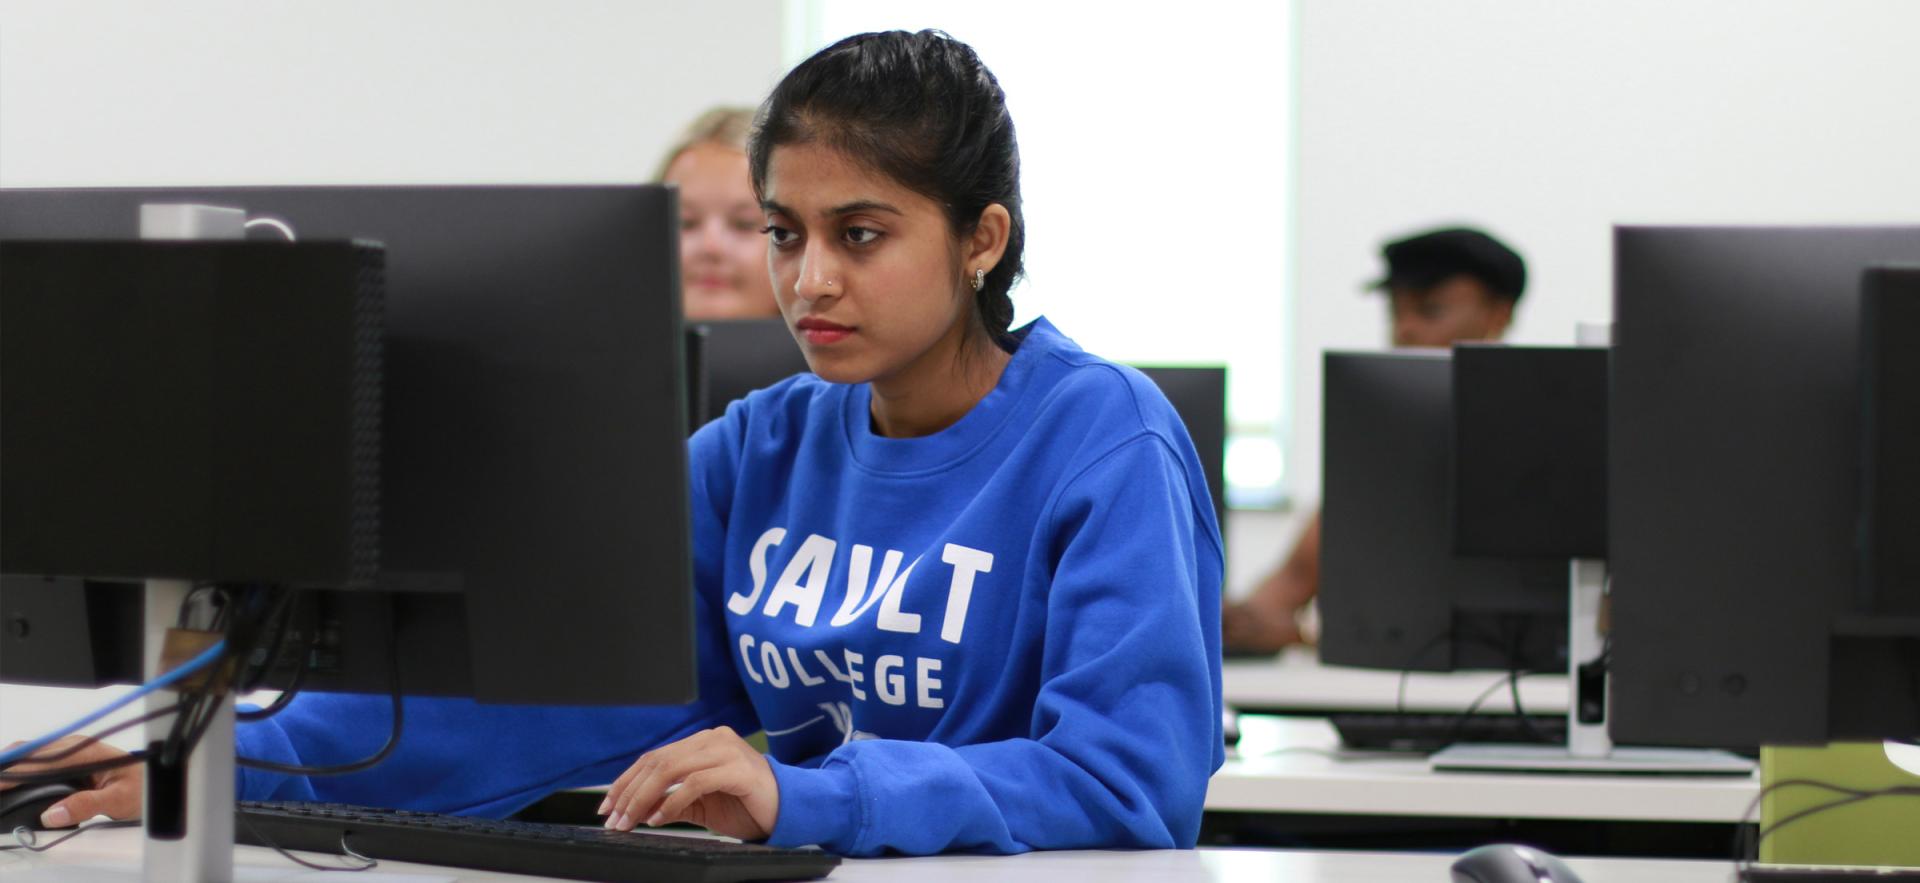 Student sitting at computer in class wearing blue о sweater